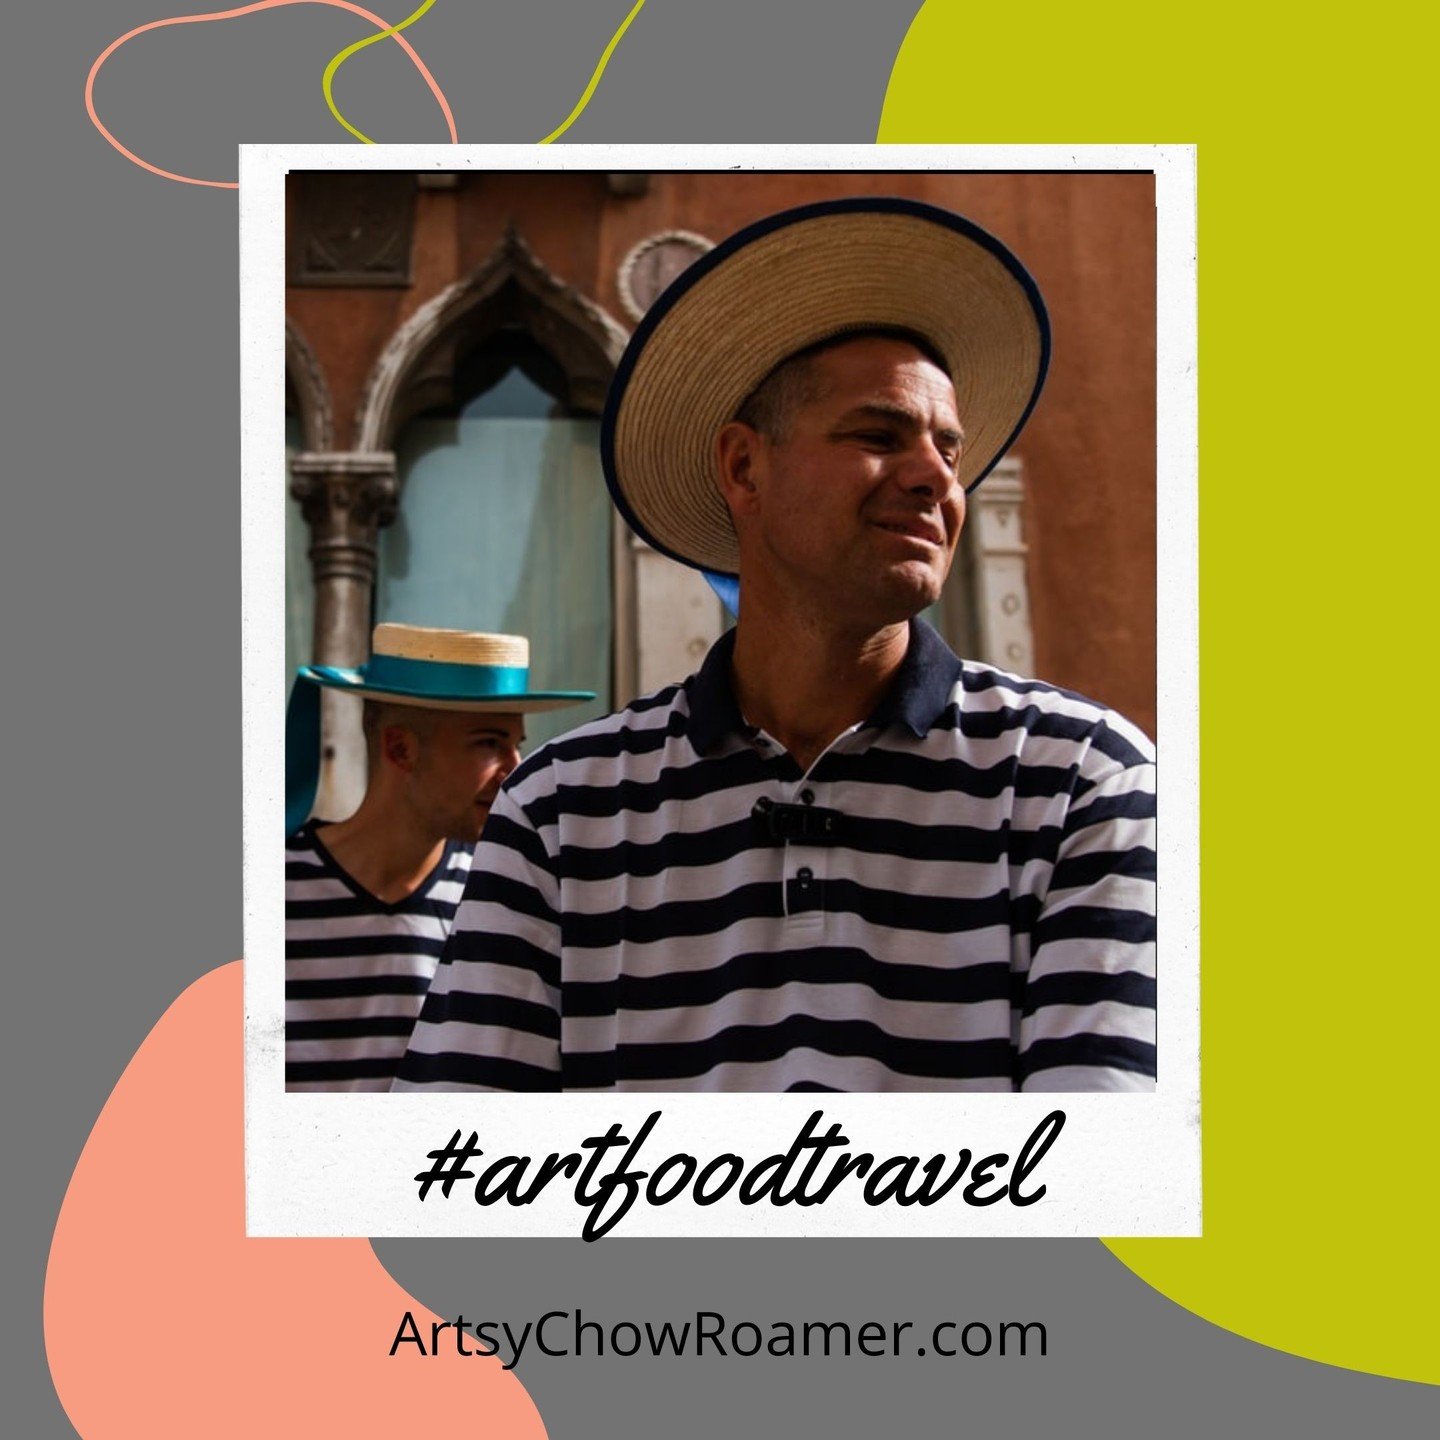 Join our band of adventurous foodies for the fun, freebies and tips...

#artsychowroamer
#thequirkytourist
#justbecause
#artfulideal
#ediblefare
#explore the world
#dametravelers
#shechefs
#ladypainters